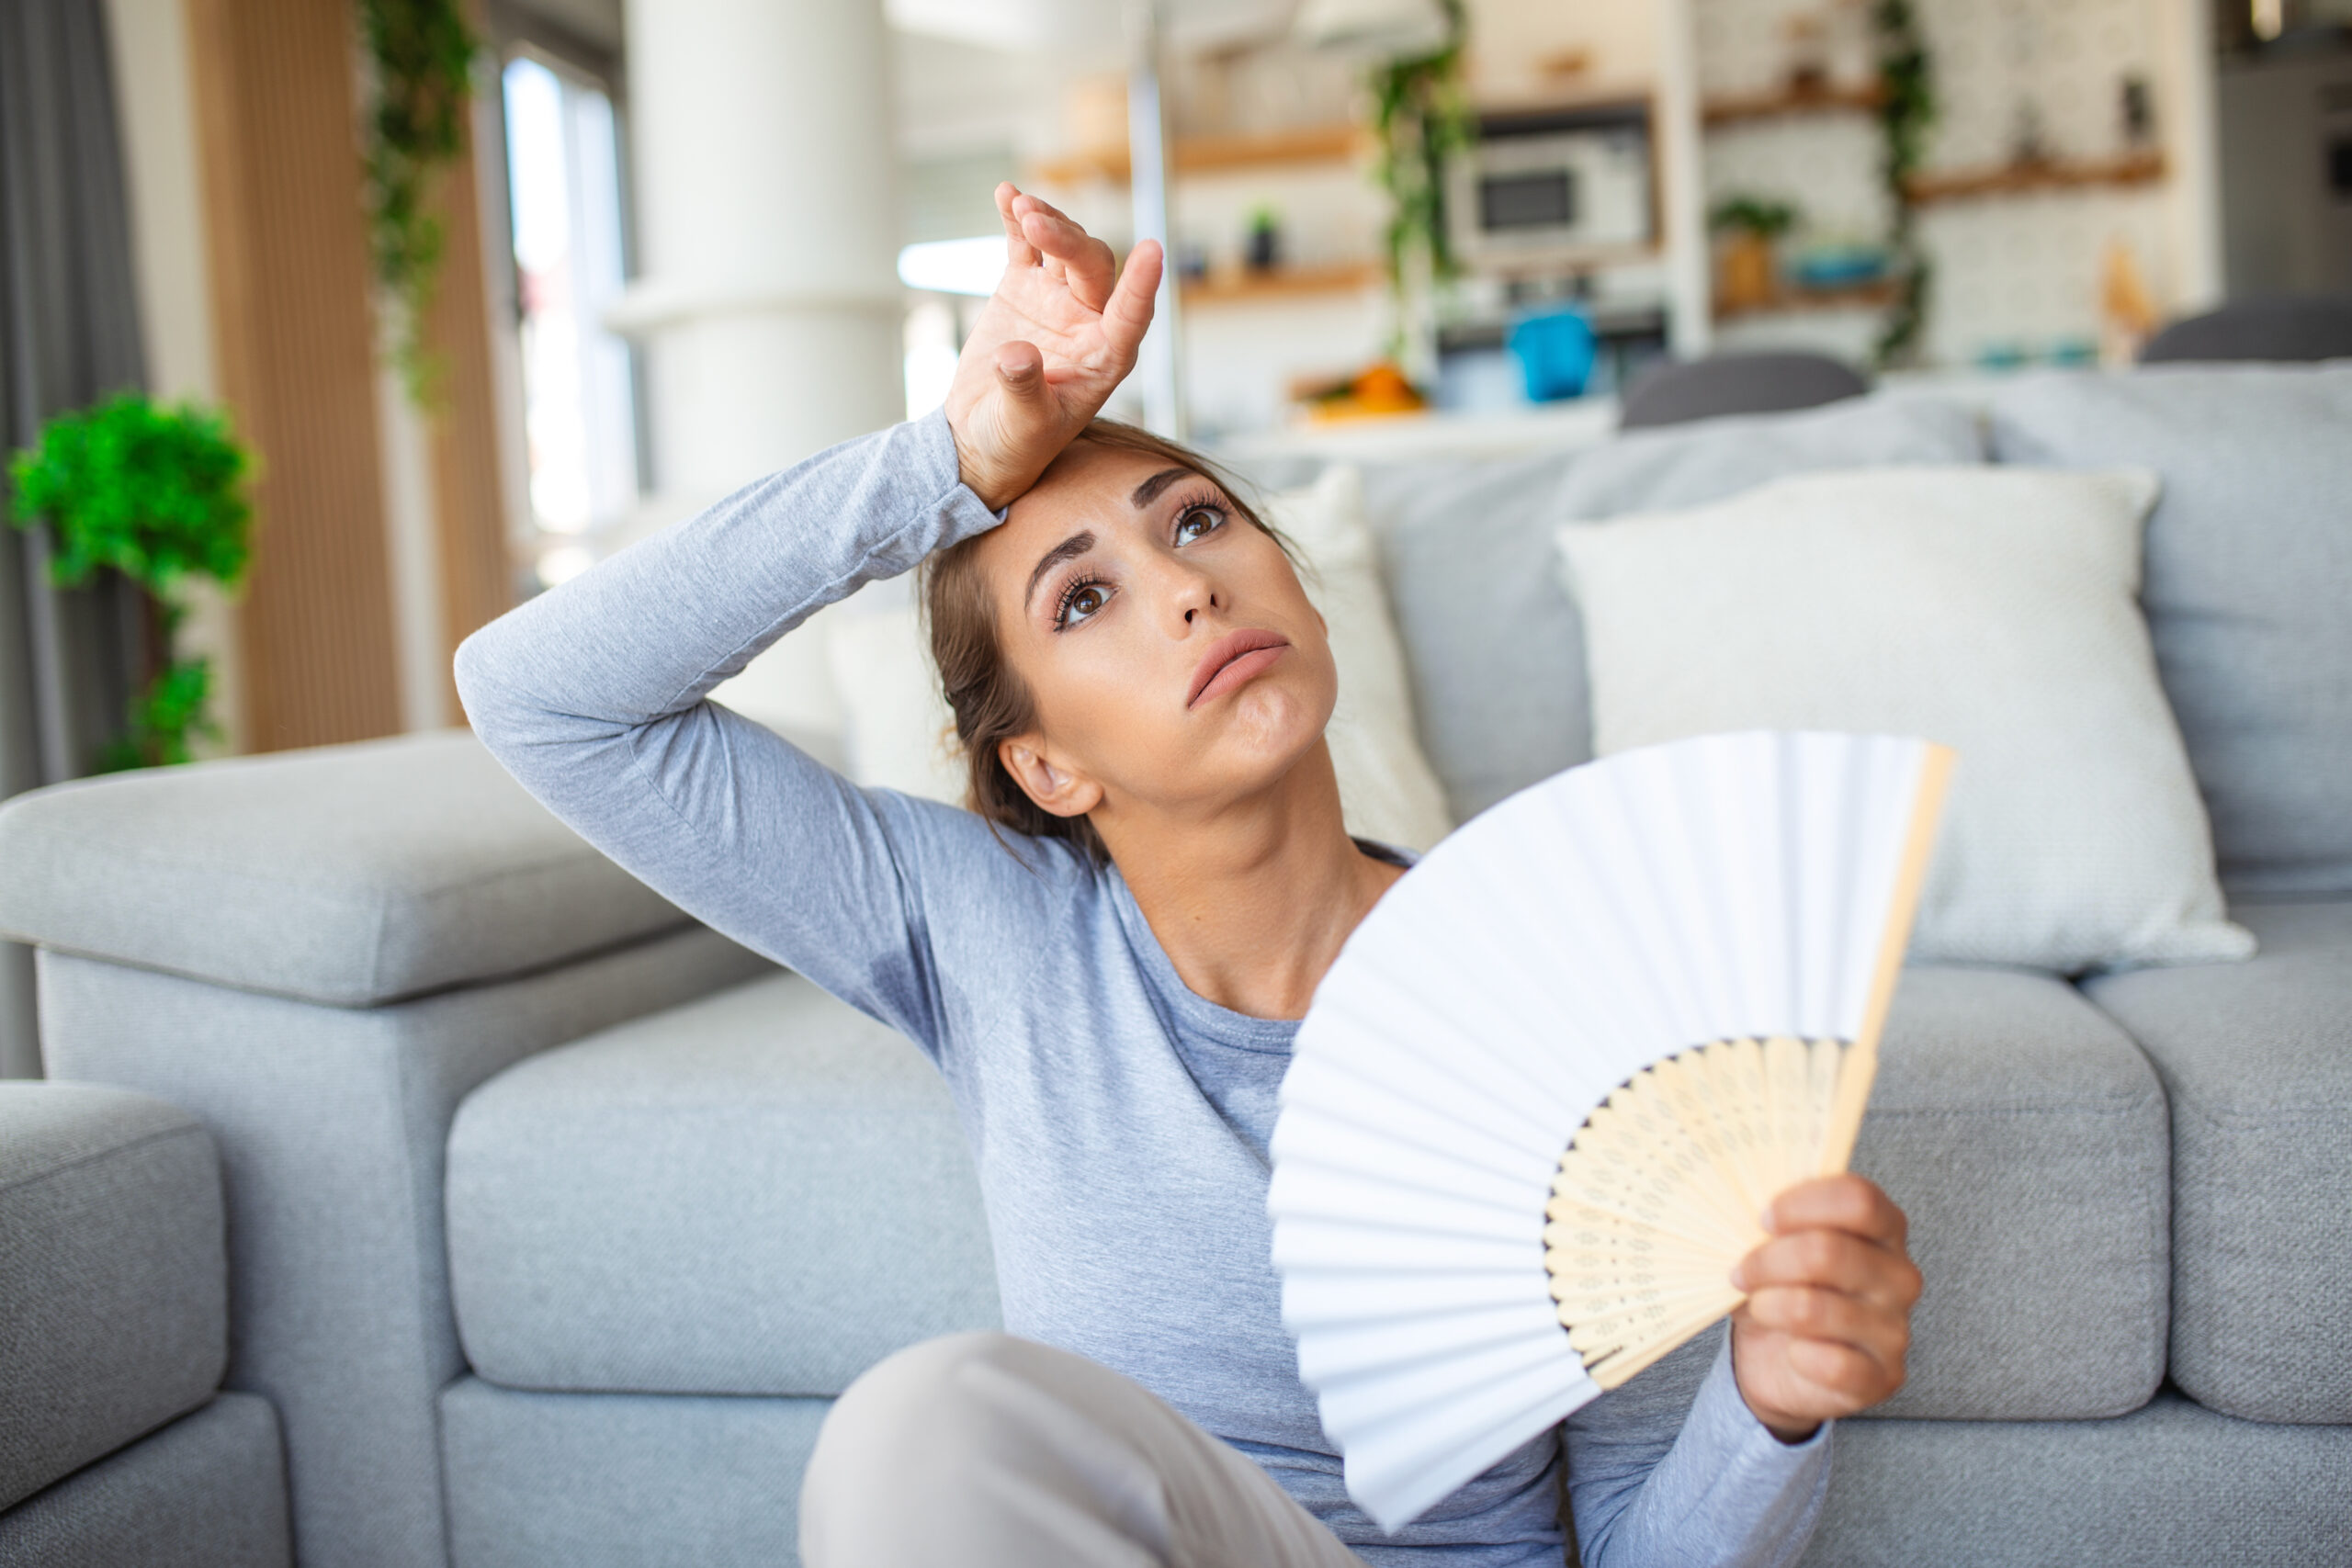 Stressed annoyed woman using waving fan suffer from overheating, summer heat health hormone problem, woman sweat feel uncomfortable hot in summer weather problem without air conditioner